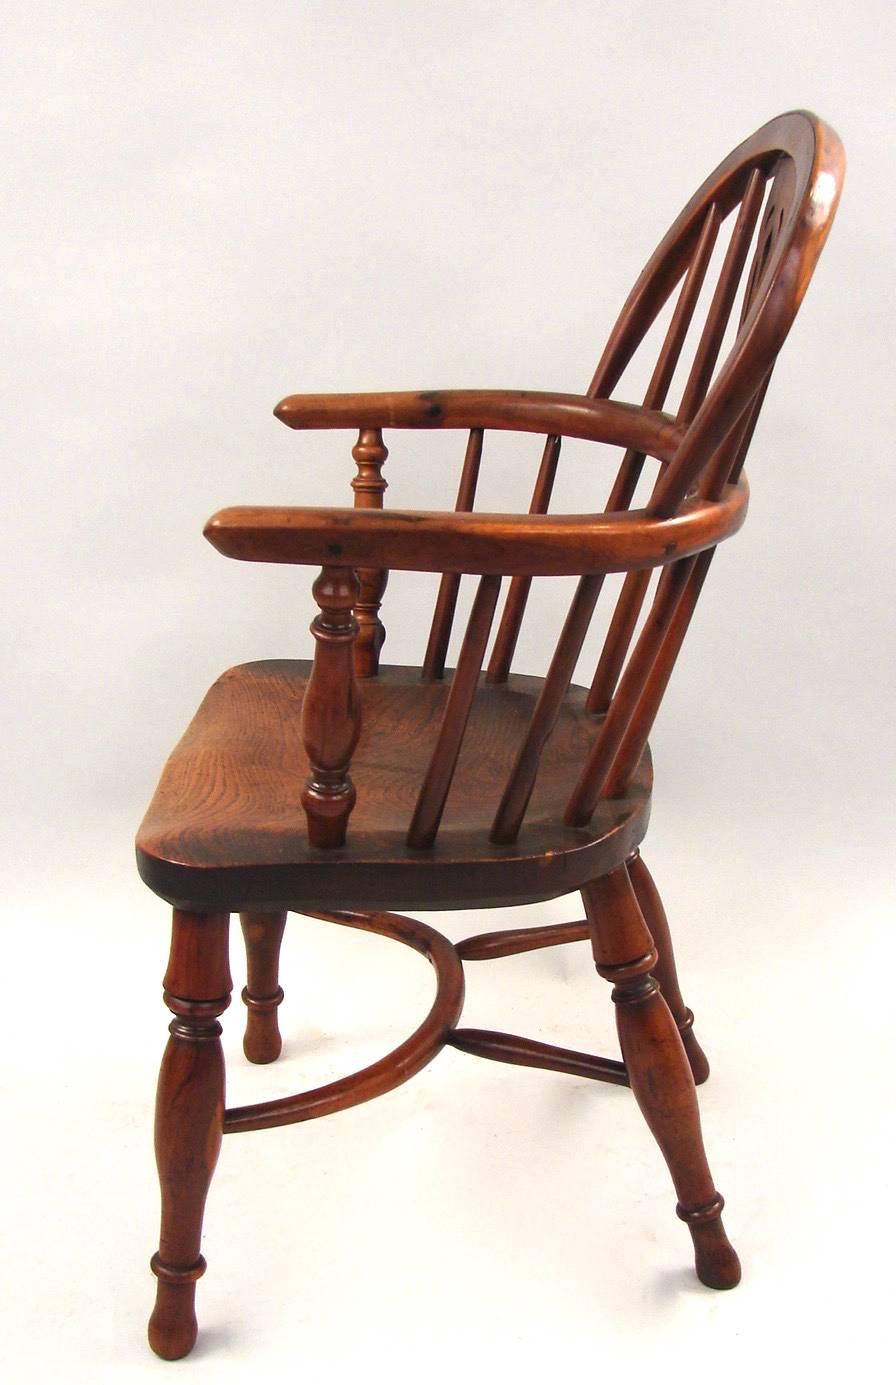 A rare signed English yew wood and elm windsor child's armchair of typical form, stamped on the seat edge Whitworth Gamston, made by John Whitworth, the legs joined by a crinoline stretcher circa 1840-1860.